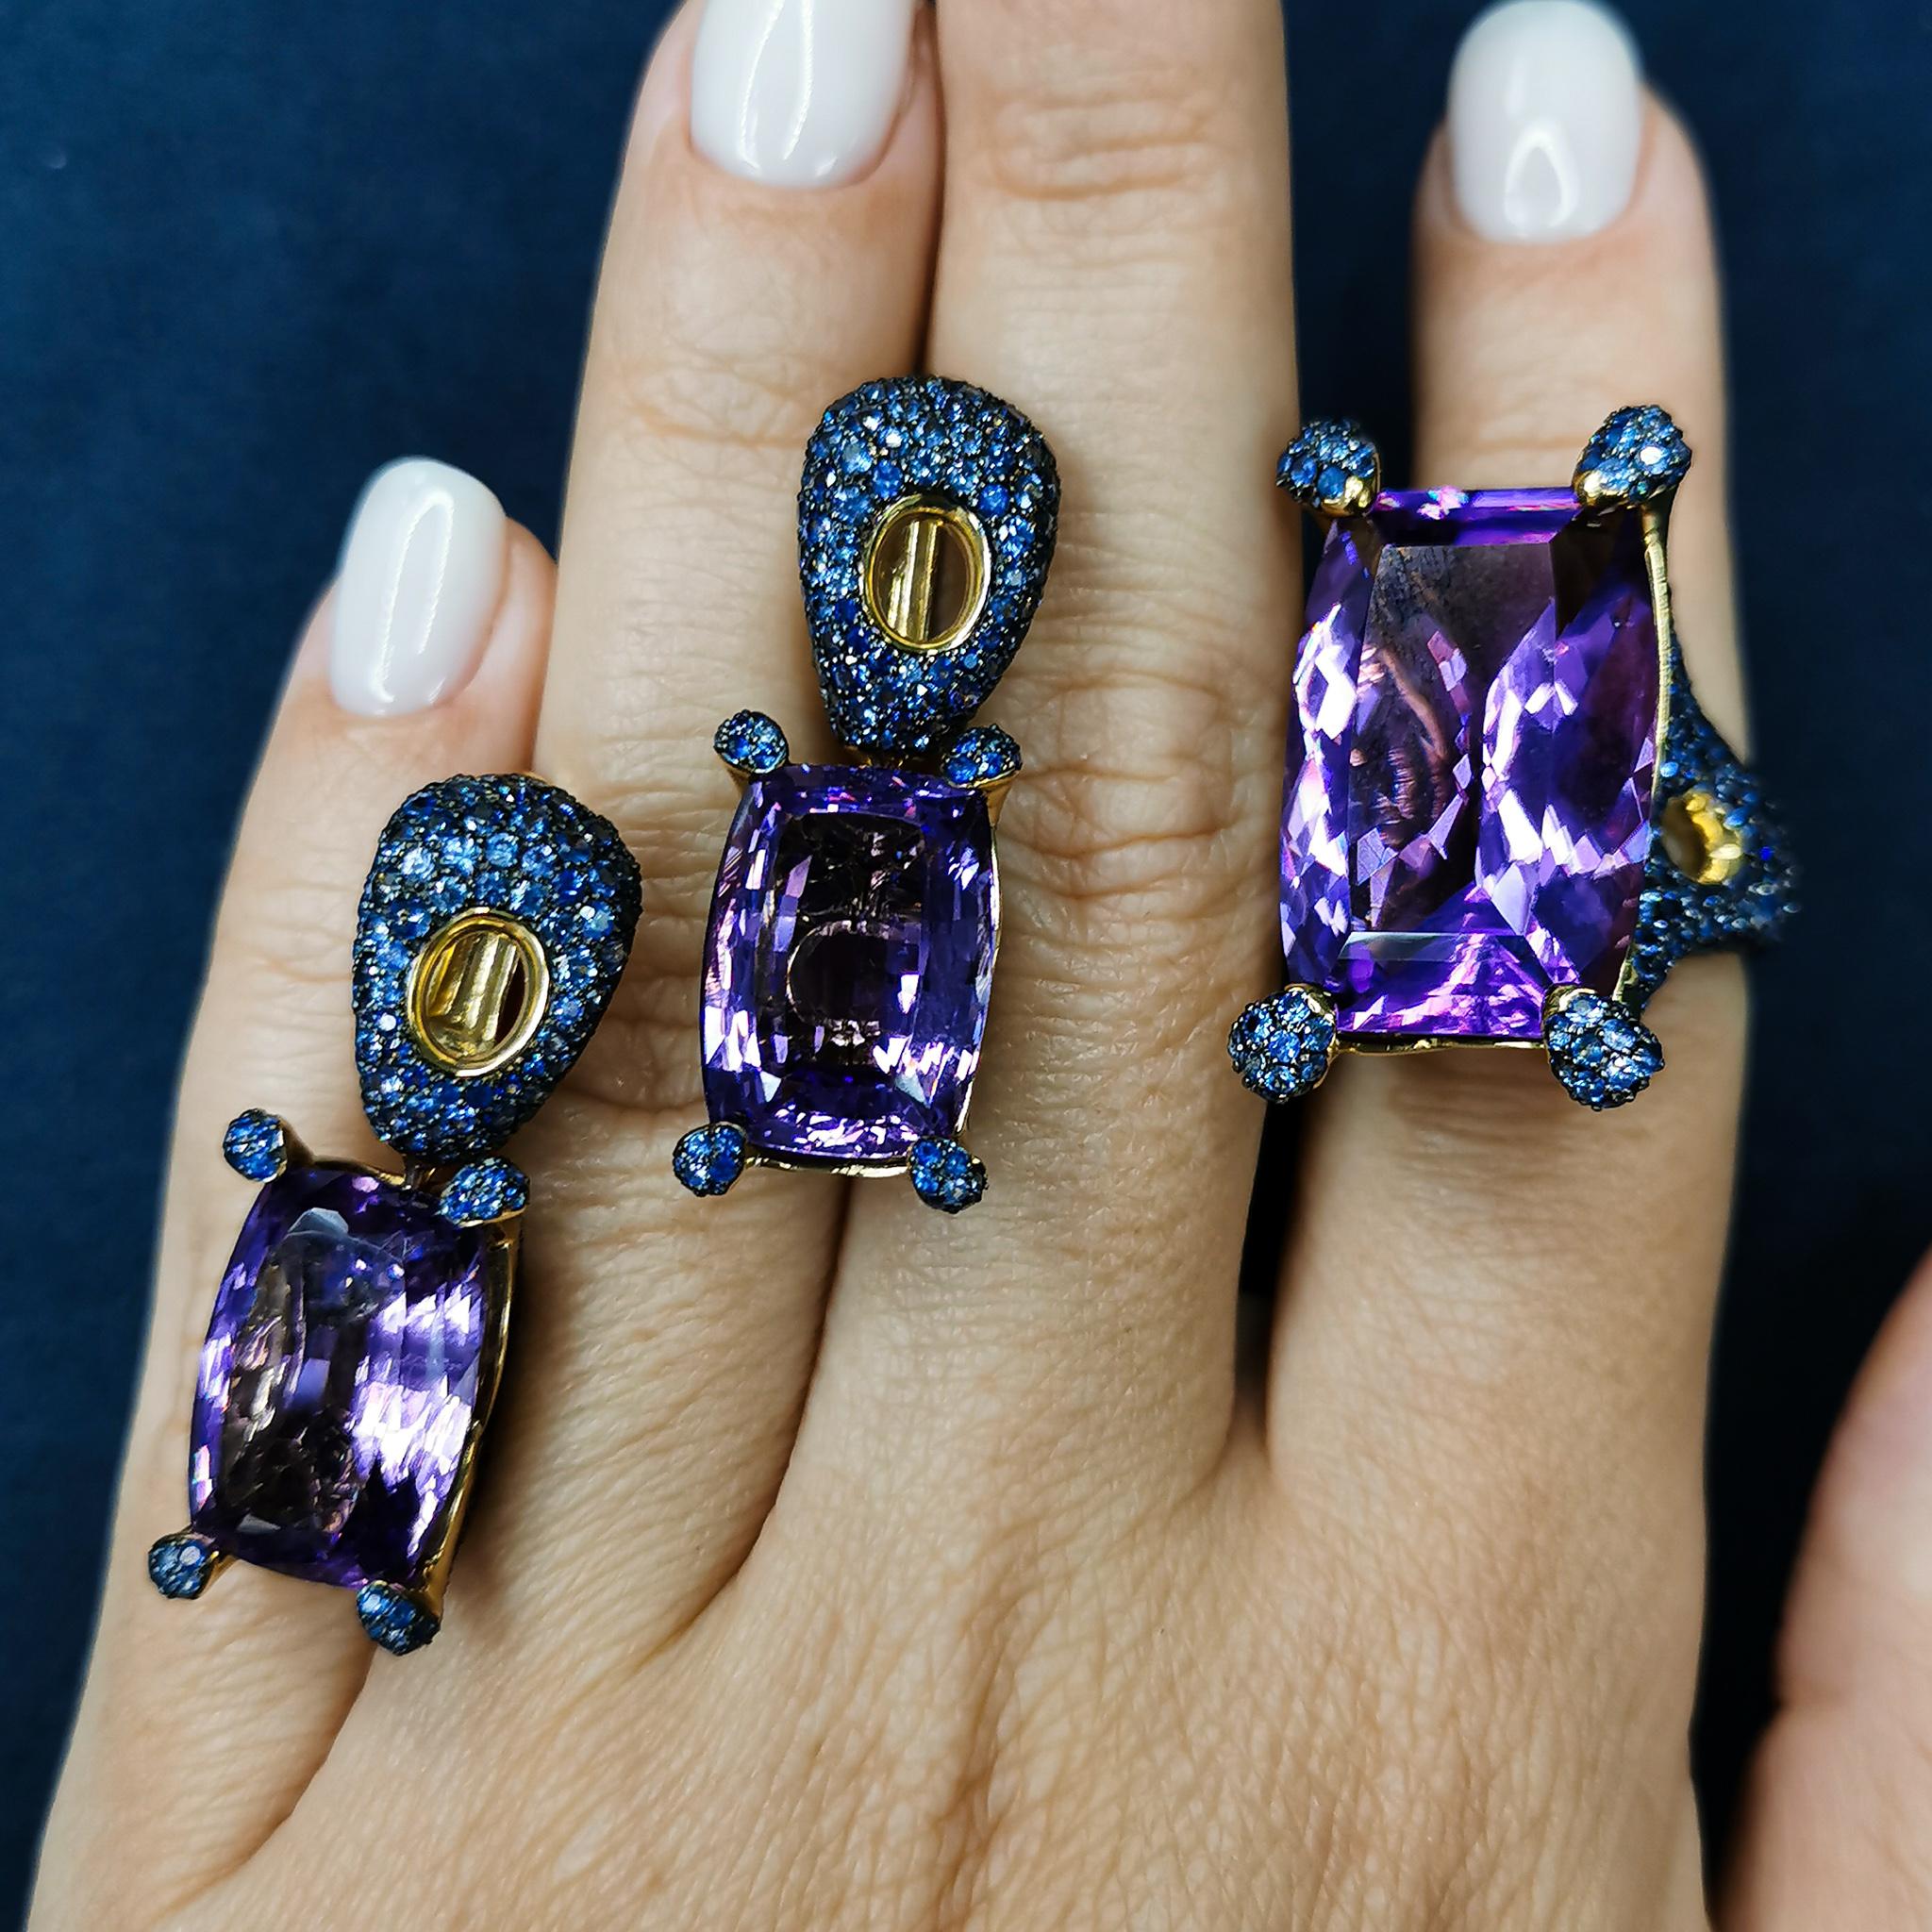 Amethyst Blue Sapphires 18 Karat Yellow Gold Suite
Highlighting an Amethyst and Blue Sapphires are mounted on an 18 Karat Gold lined with black rhodium. It displays a riveting interplay of contrast surfaces with the finest gemstones. Delicate color